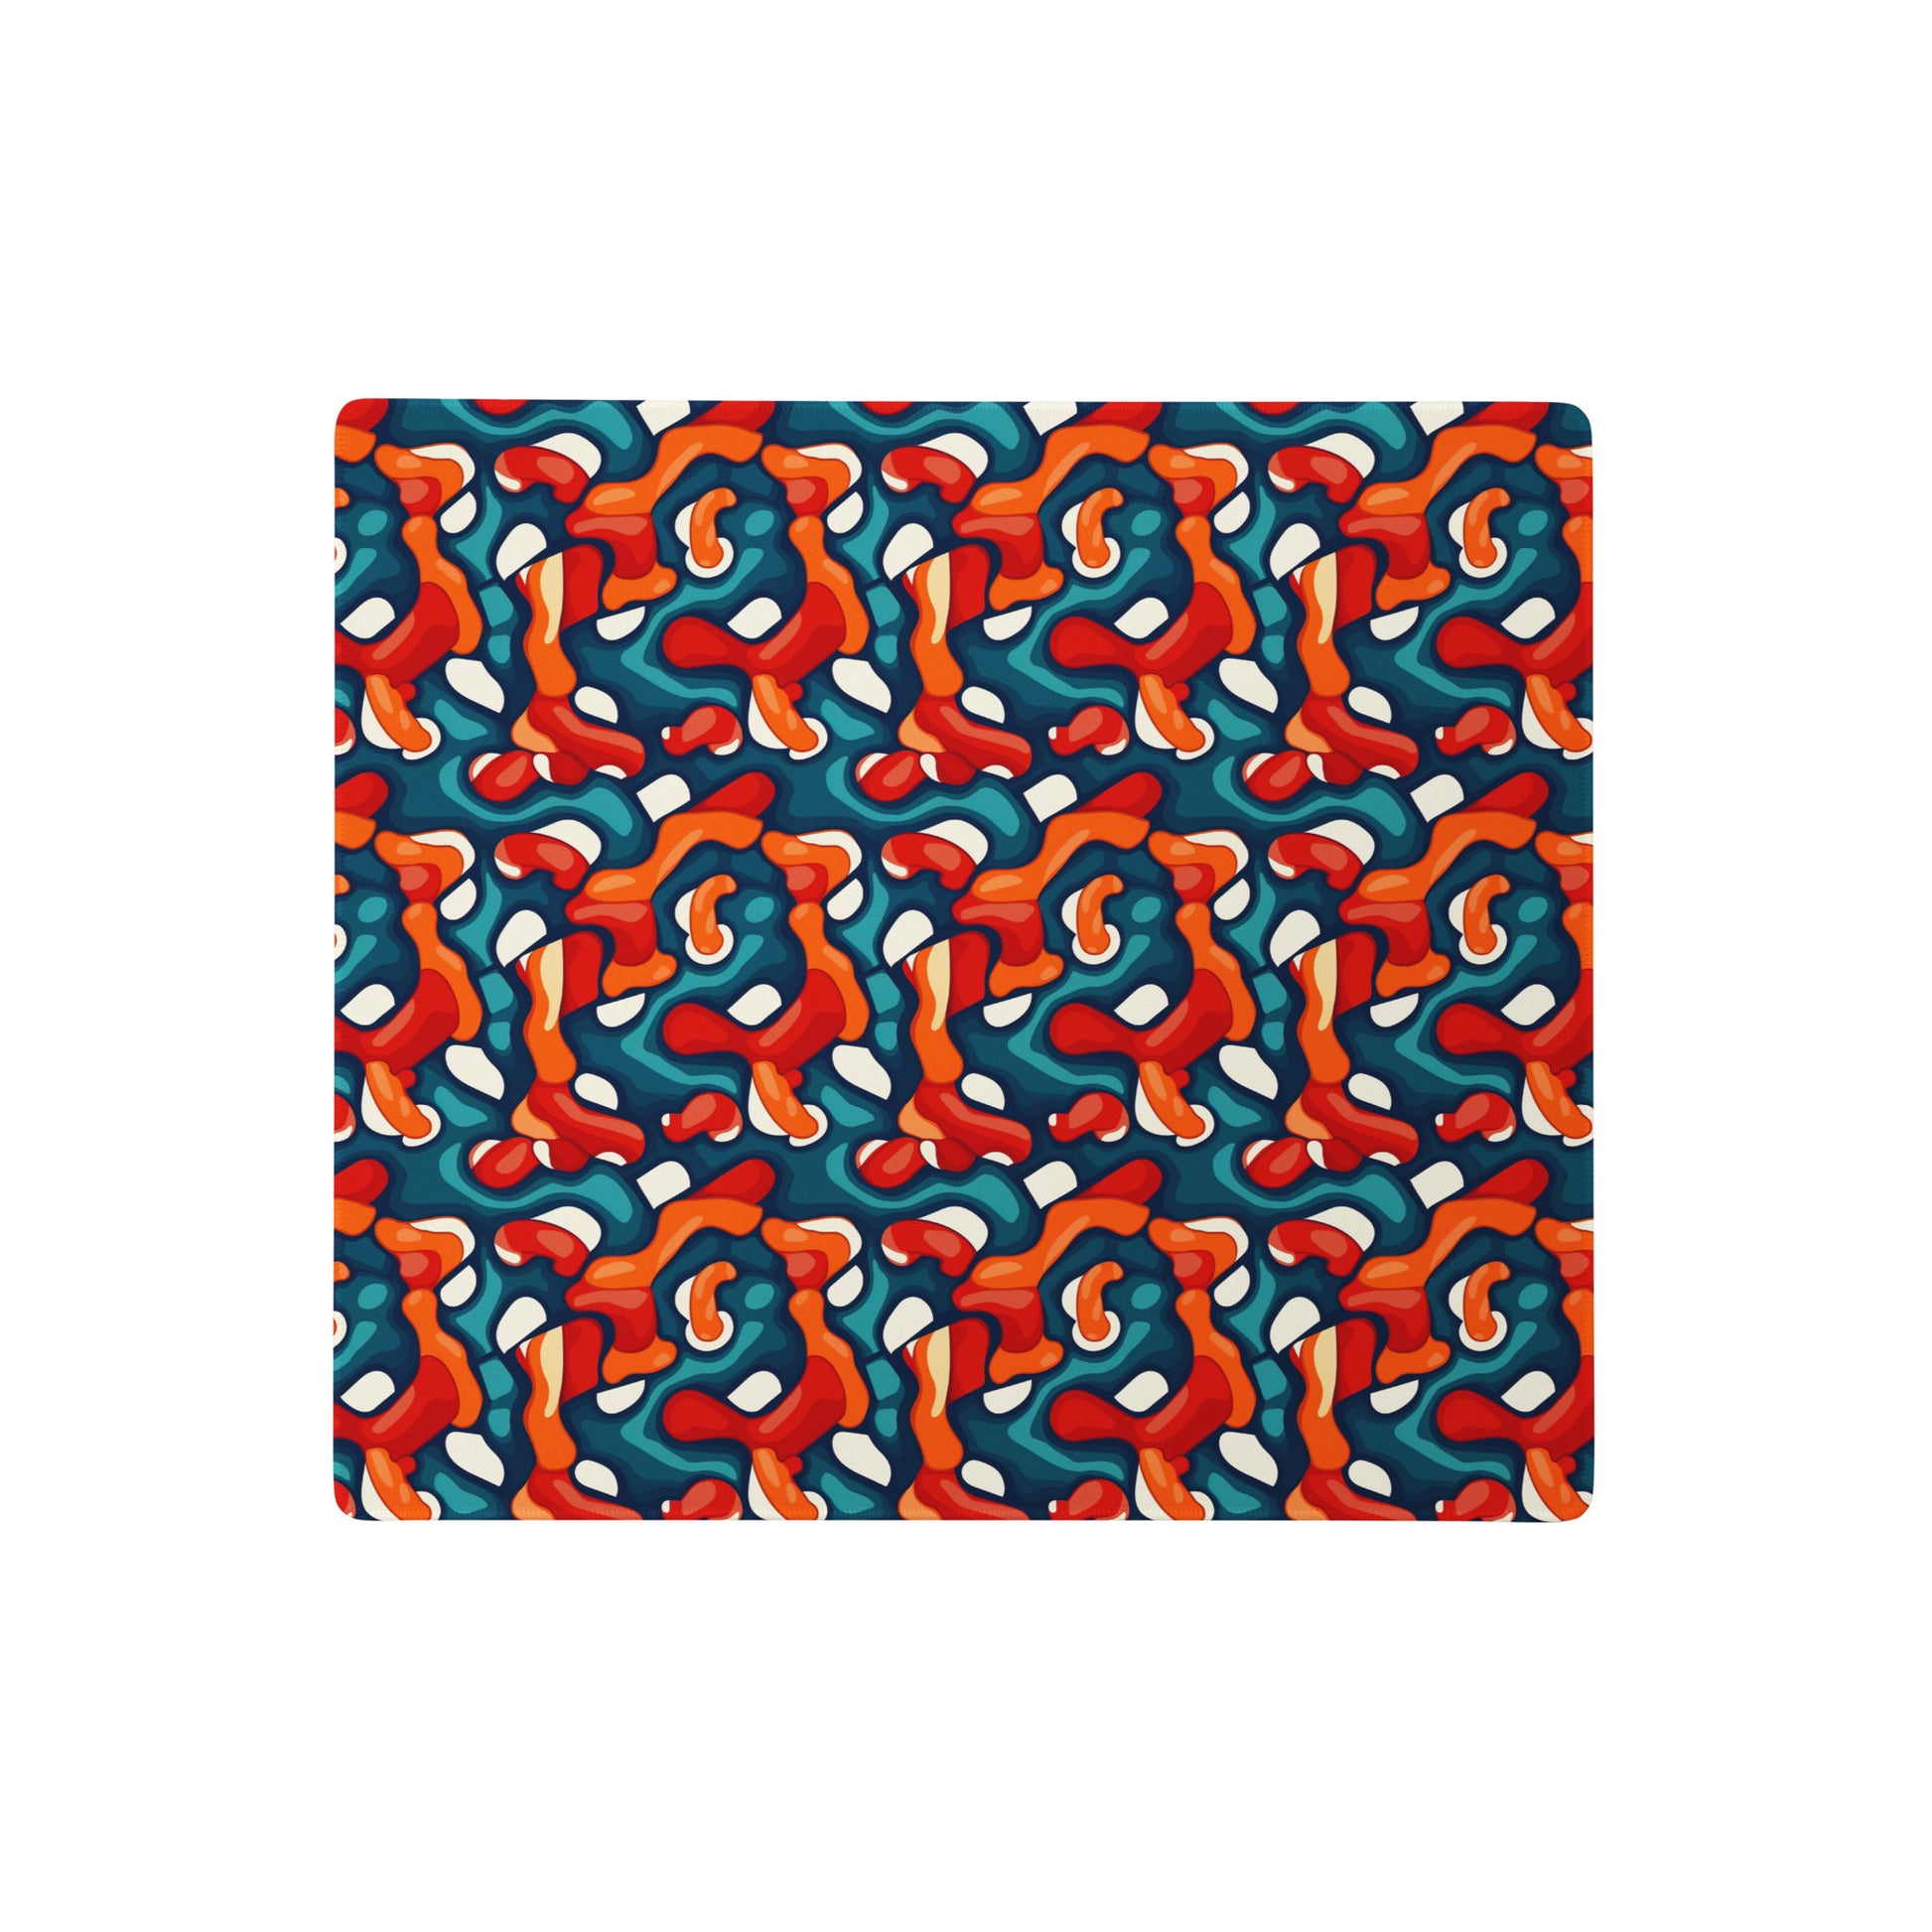 A 18" x 16" desk pad with abstract line art on it. Red, Teal and Orange in color.